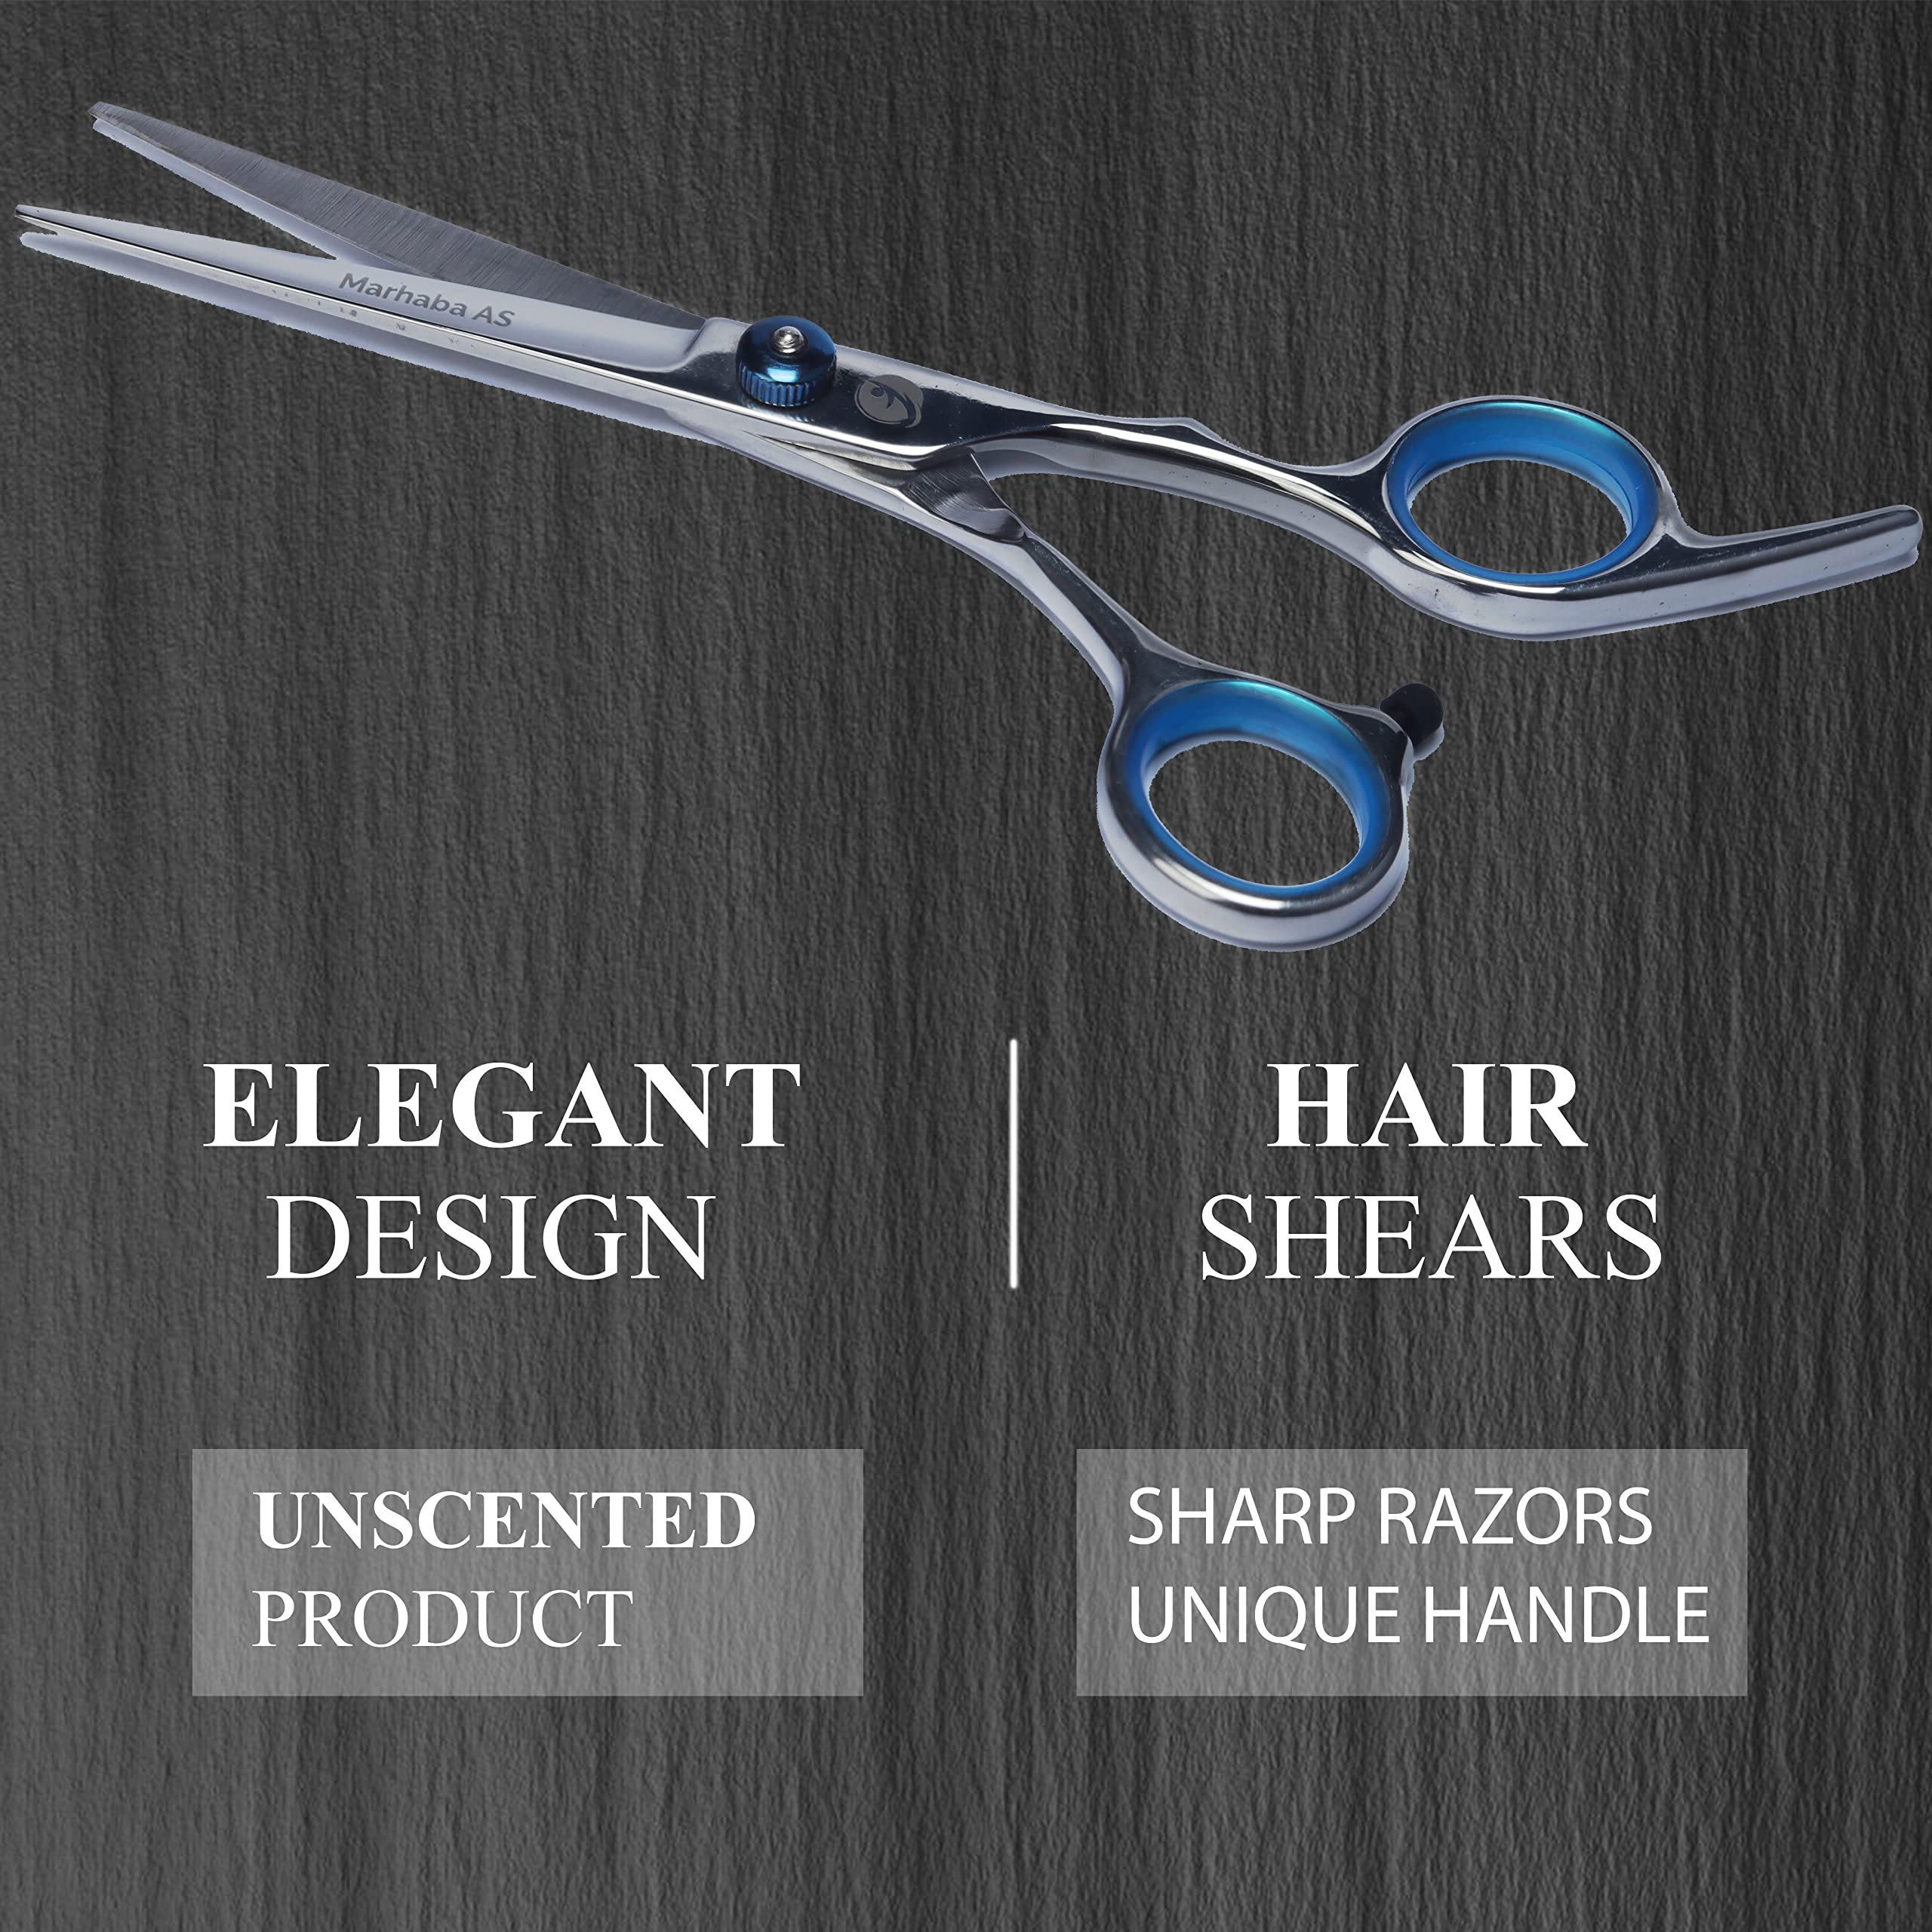 Marhaba AS Hair Cutting Scissors, Professional Barber Scissors, 2 Pcs Hair Cut Scissors set for Men and Women, Stainless Steel Hair Shears for Home and Salon Use, Scissors for Hair with Leather Case…